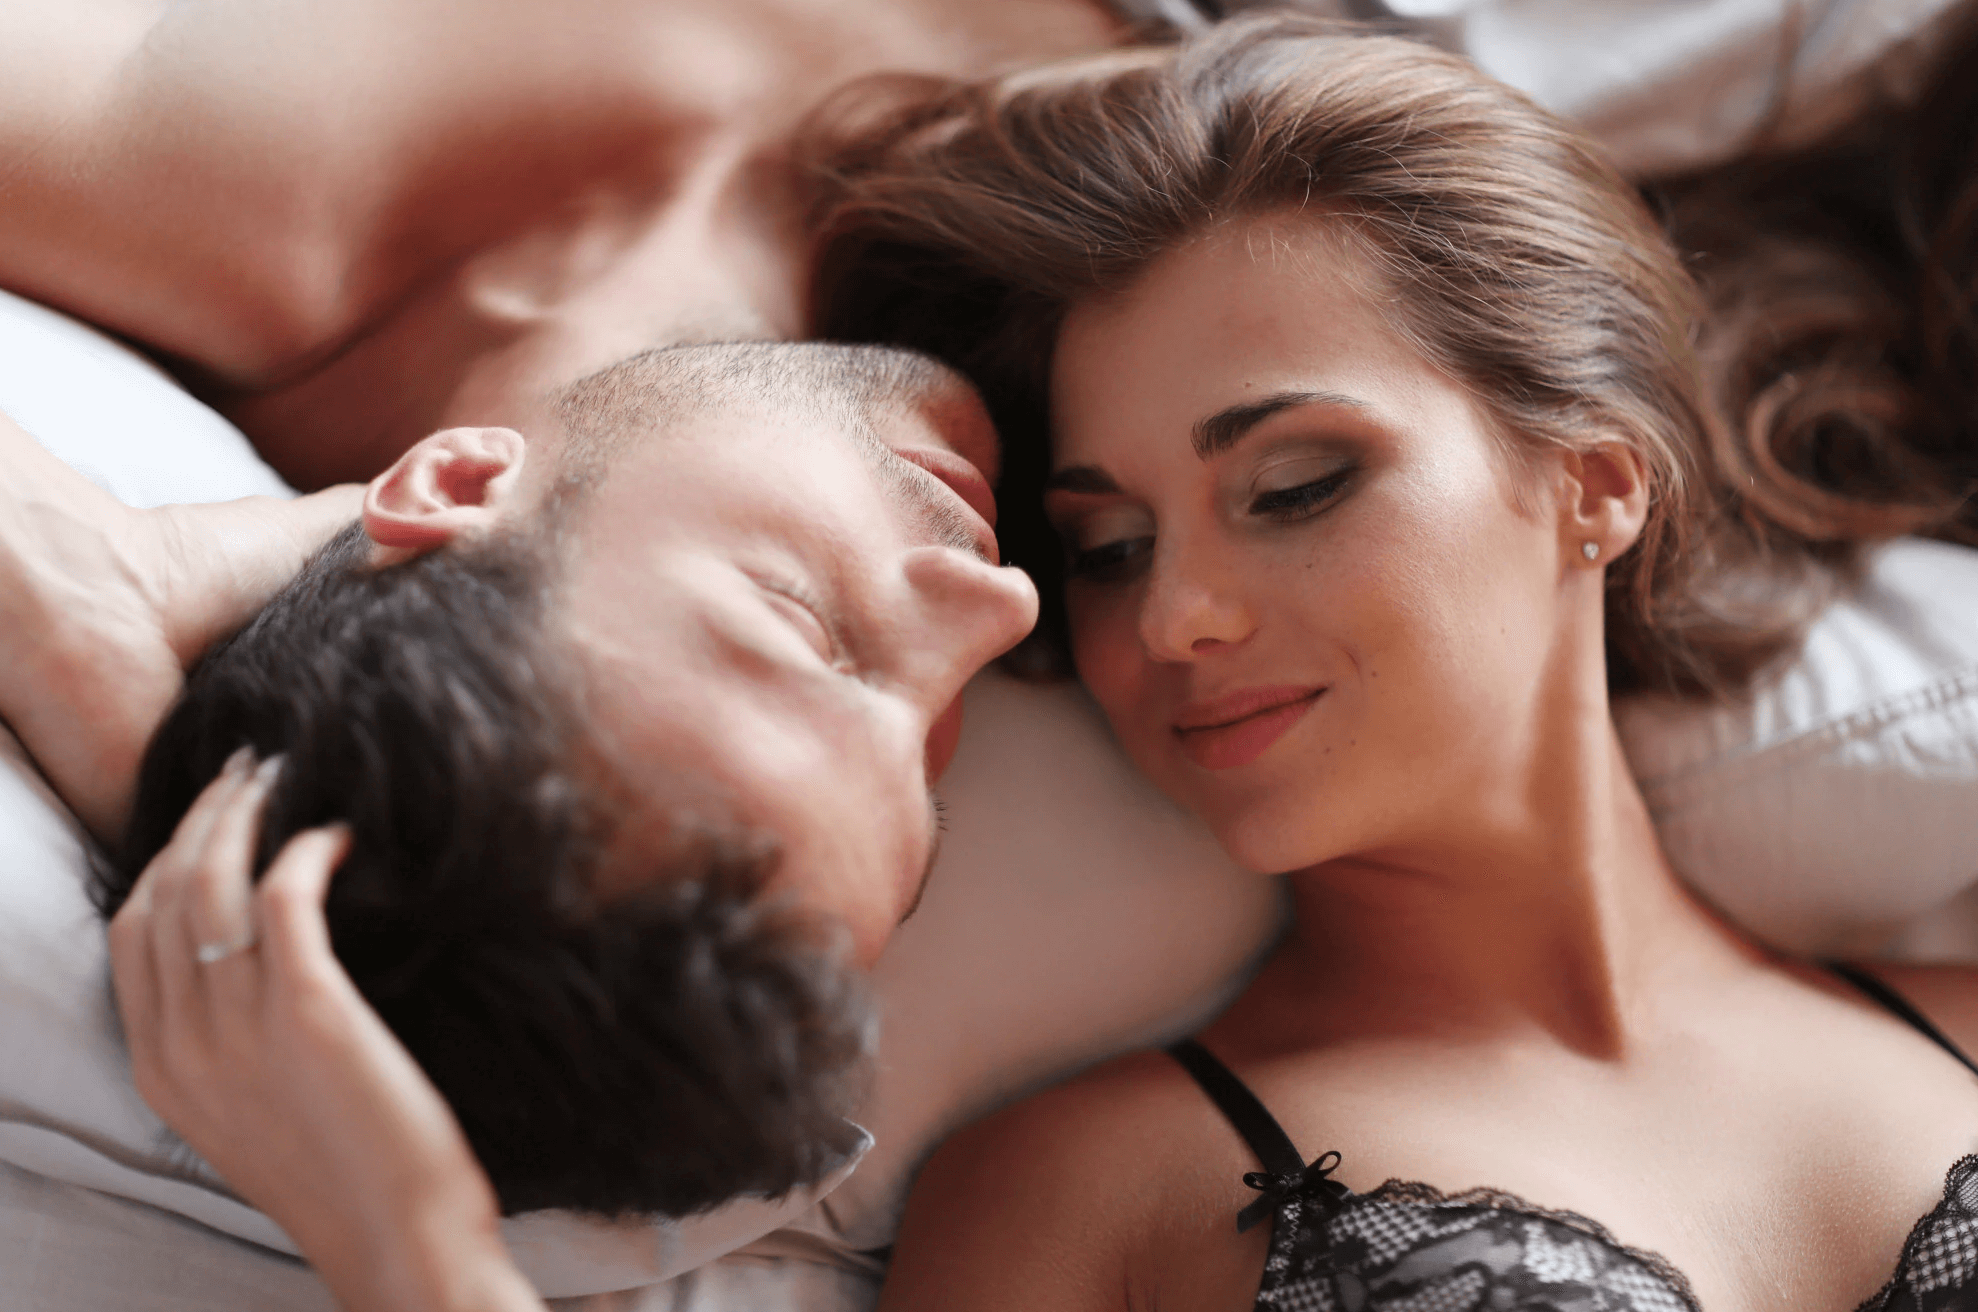 The 69 Sex Position A Guide to Simultaneous Pleasure and Intimacy